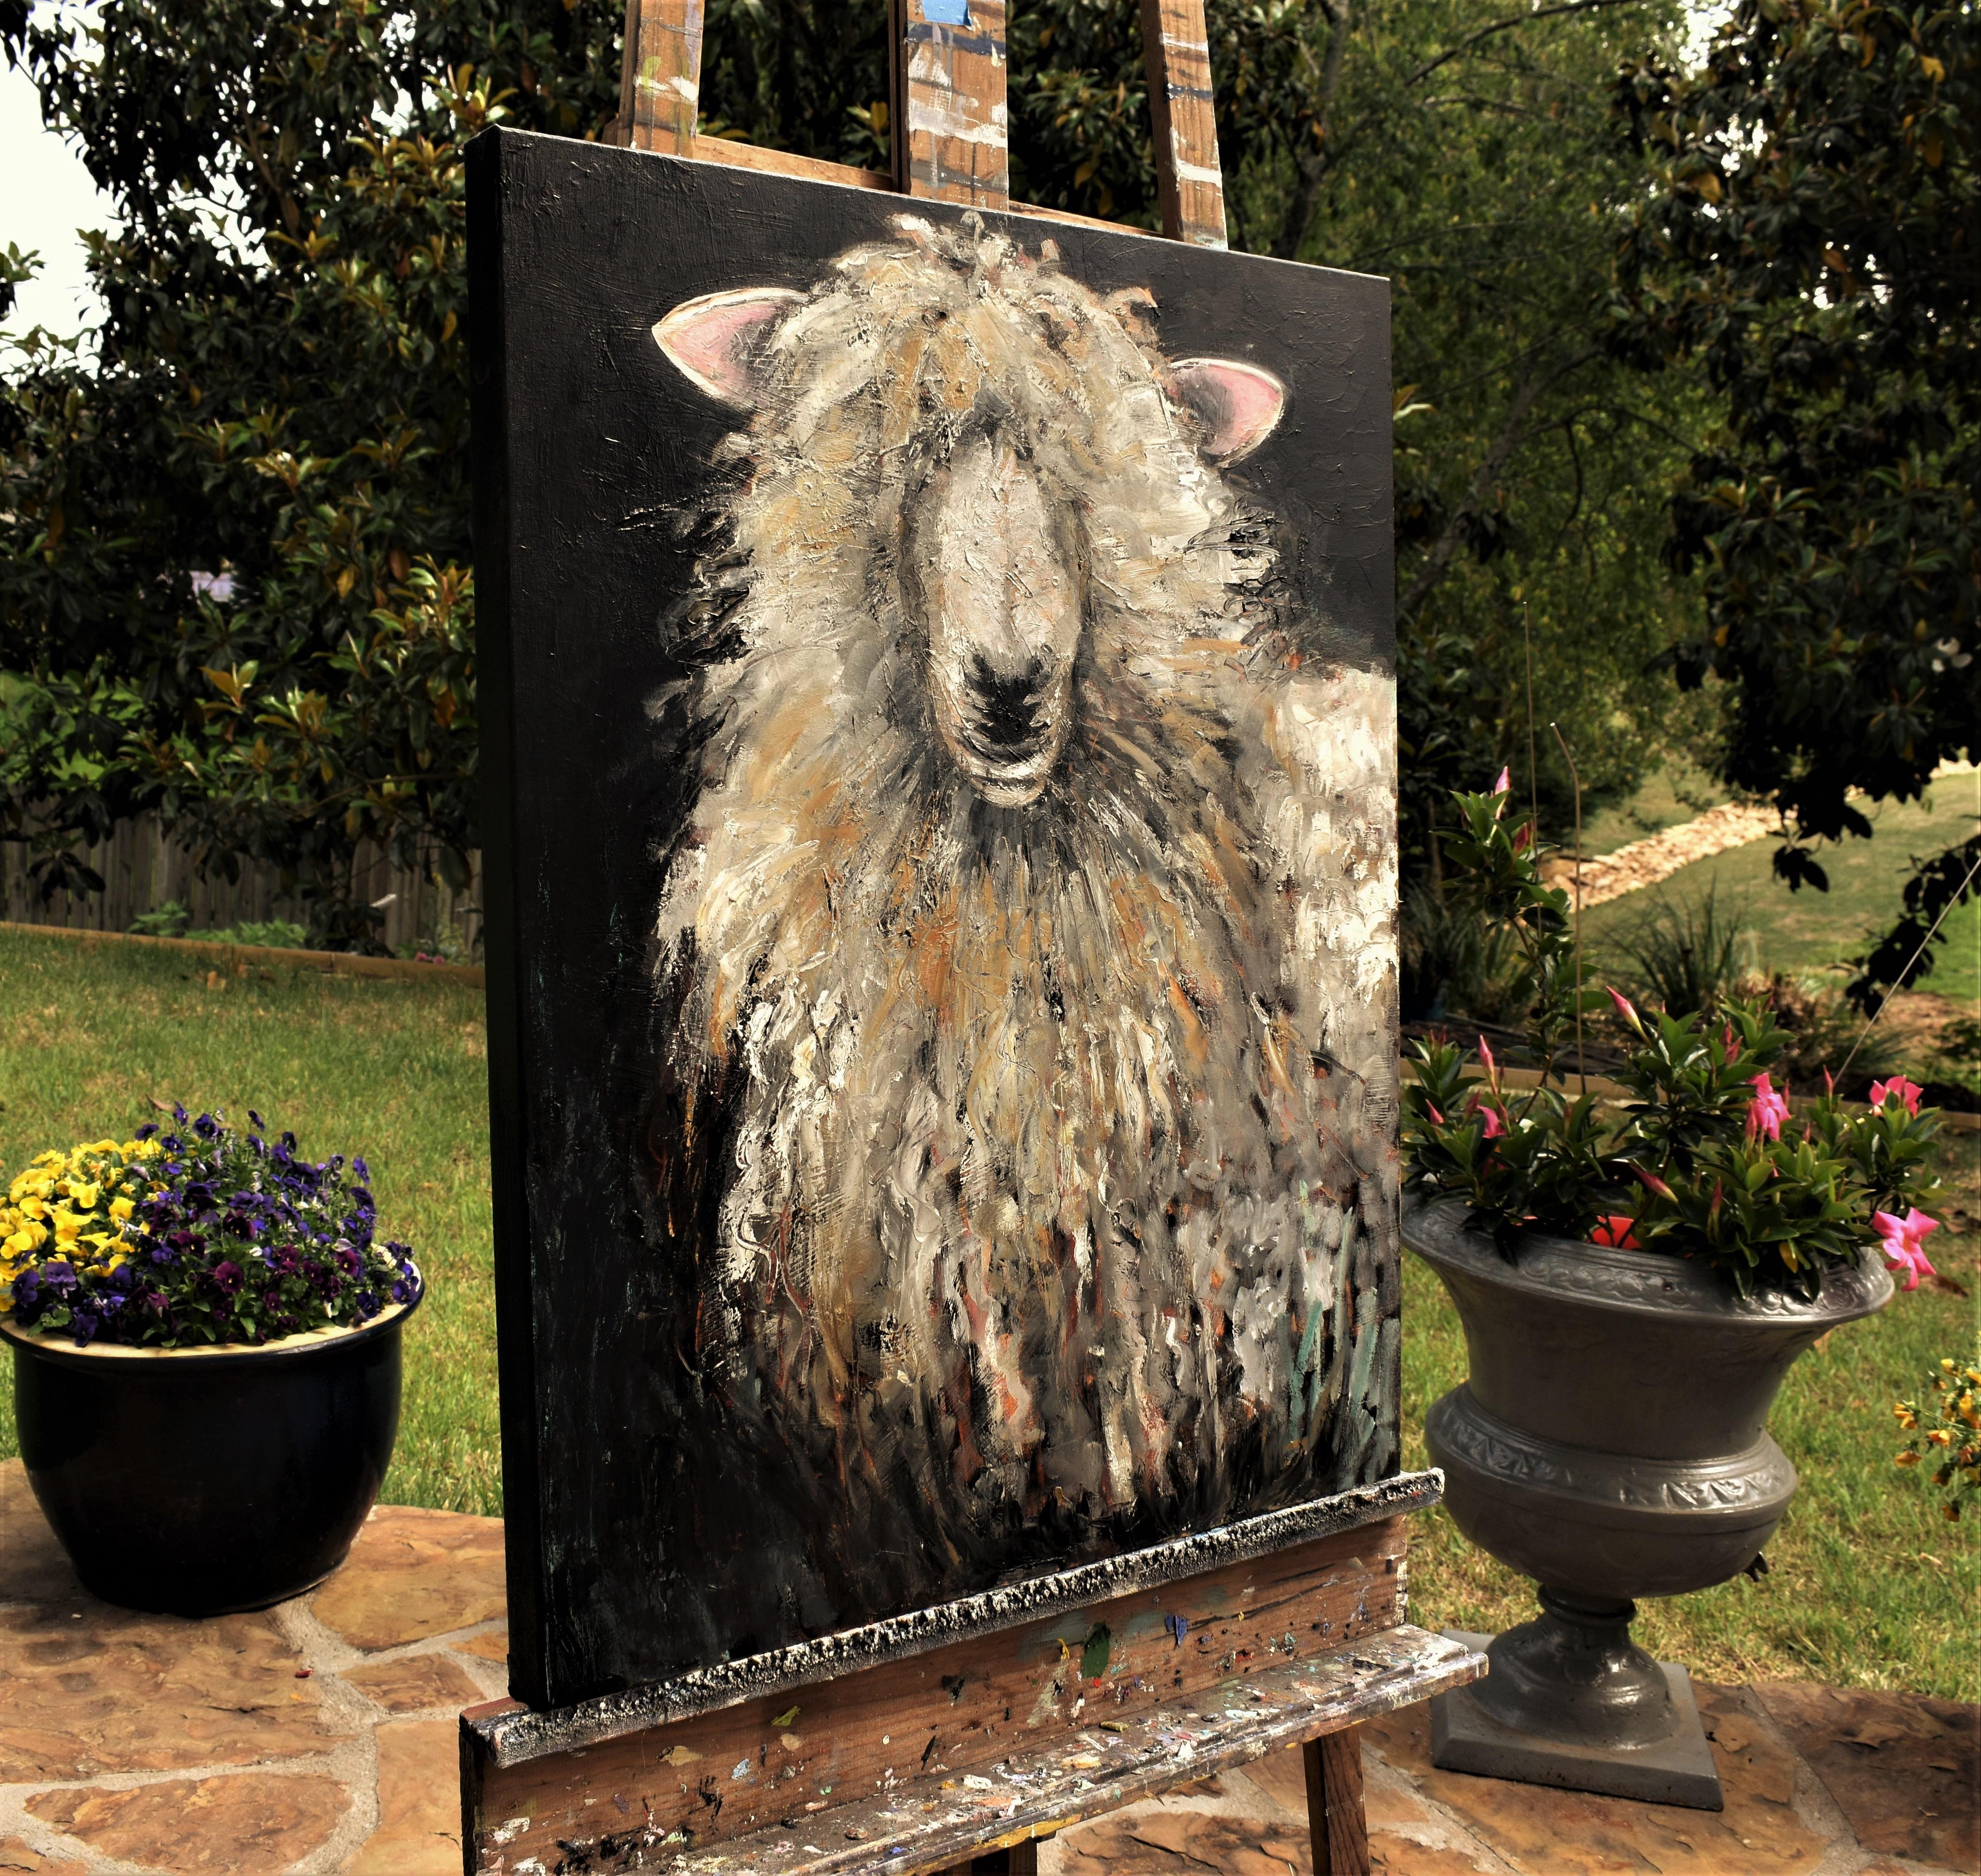 <p>Artist Comments<br>Artist Mary Pratt paints a portrait of a Cotswold sheep featuring thick, textured layers of paint. She achieves a rich tactile surface with light impasto. Bold, broad strokes emphasize the sheep's woolly fleece, celebrating the